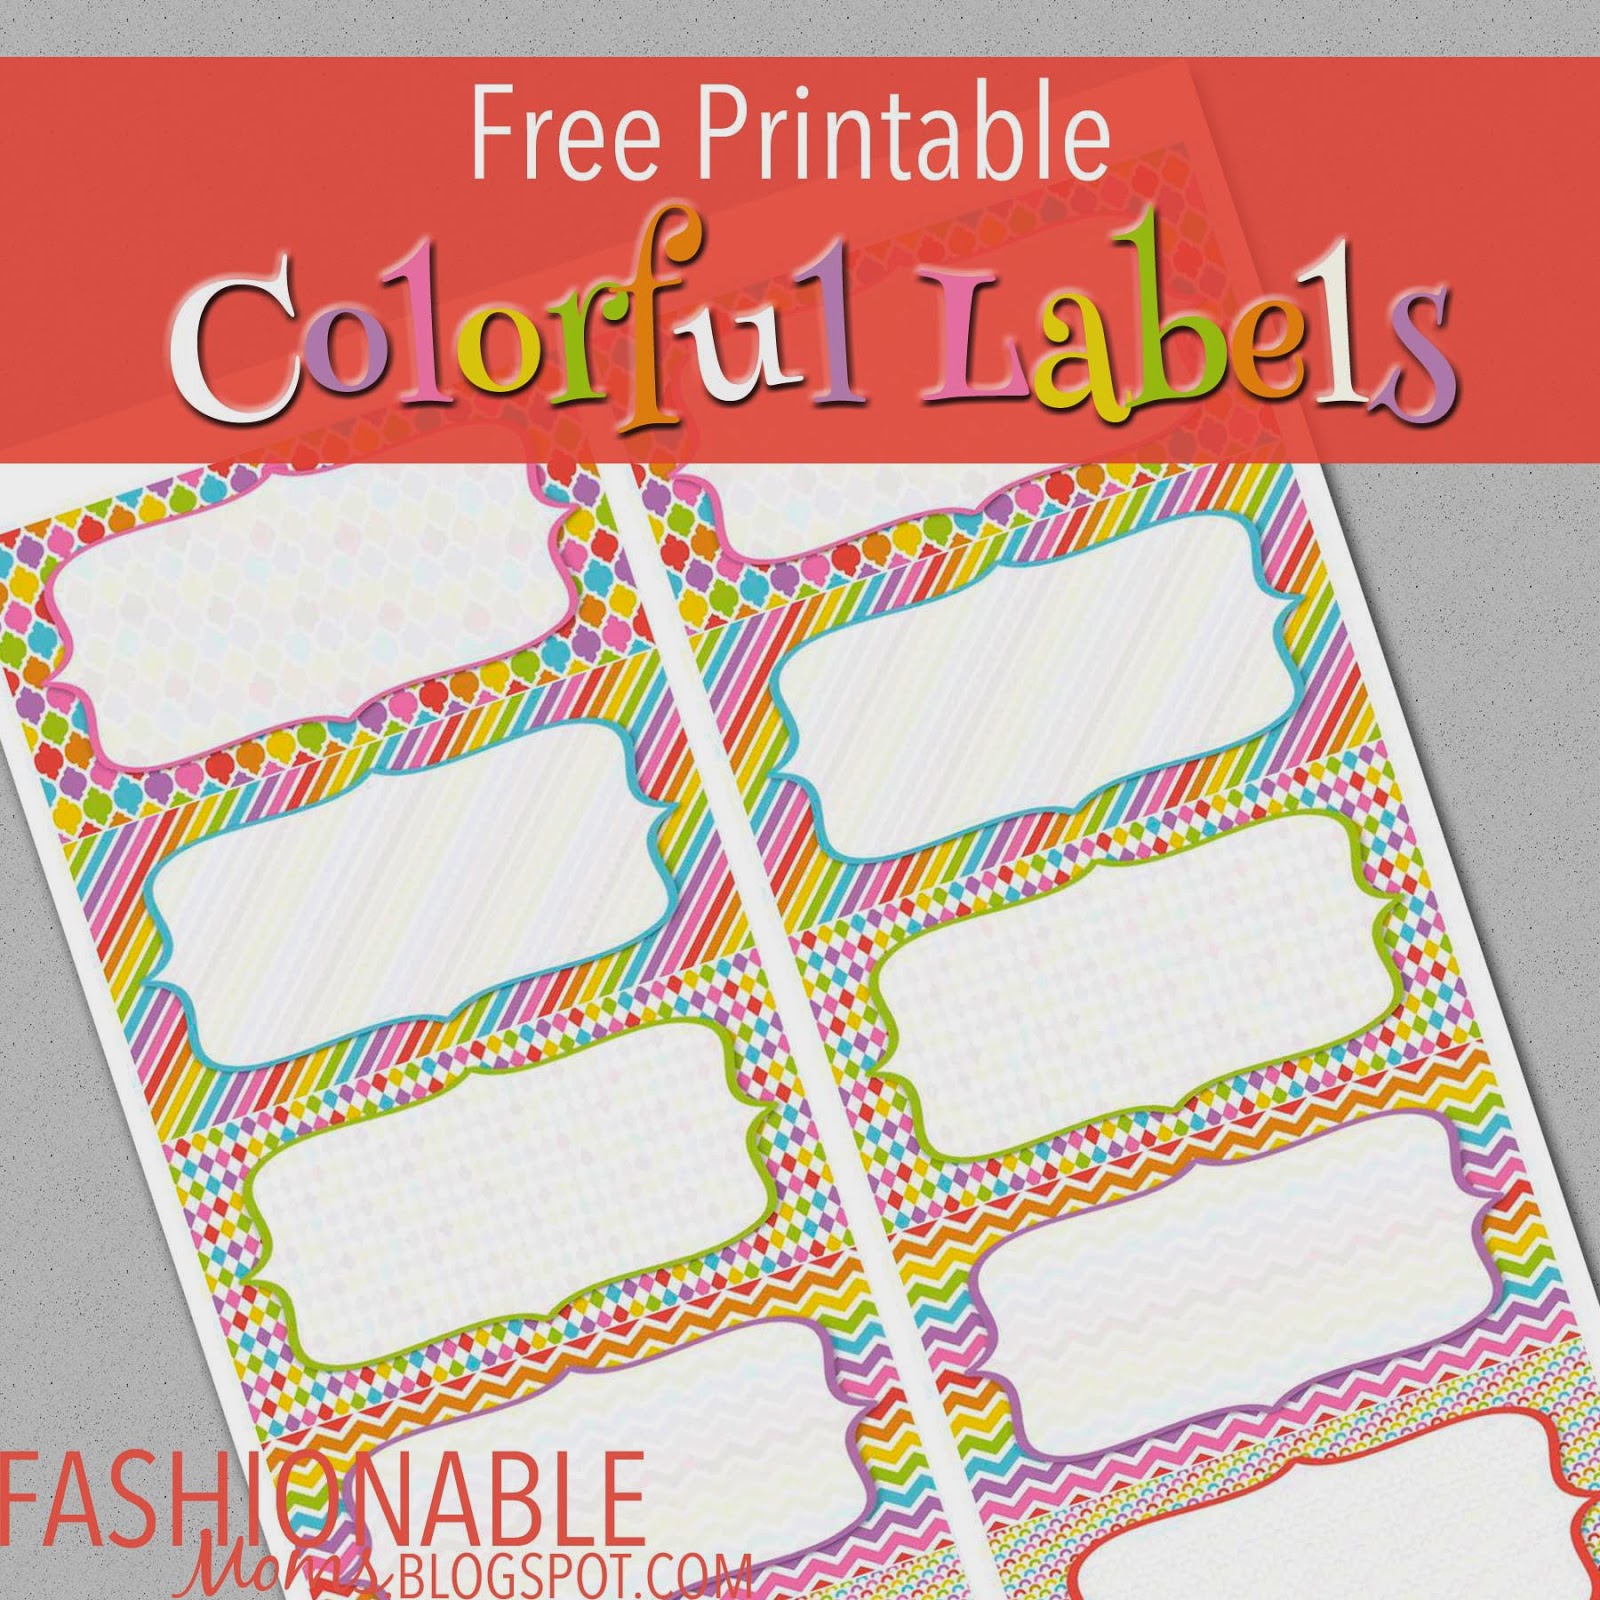 My Fashionable Designs Free Printable Colorful Labels